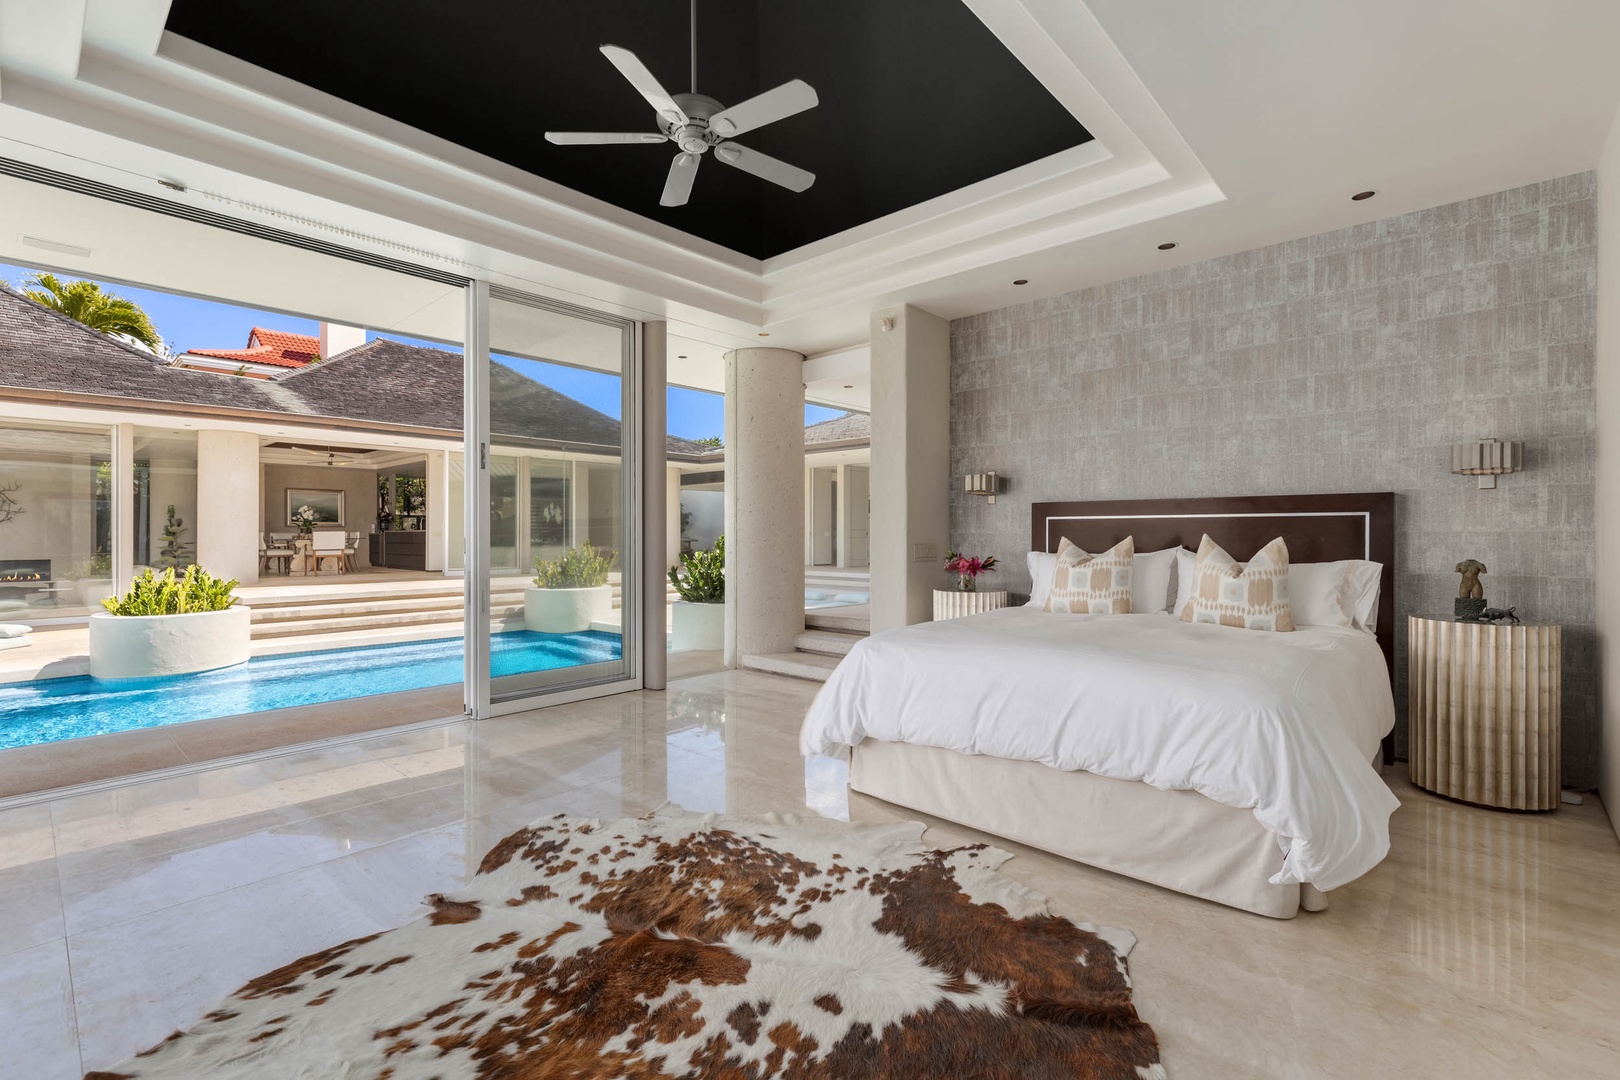 Honolulu Vacation Rentals, Sky Ridge House - Indulge in serene mornings in the grand primary suite, waking up to the gentle whir of a modern ceiling fan, nestled in a spacious bedroom with a plush king bed that seamlessly blends with an outdoor pool area.